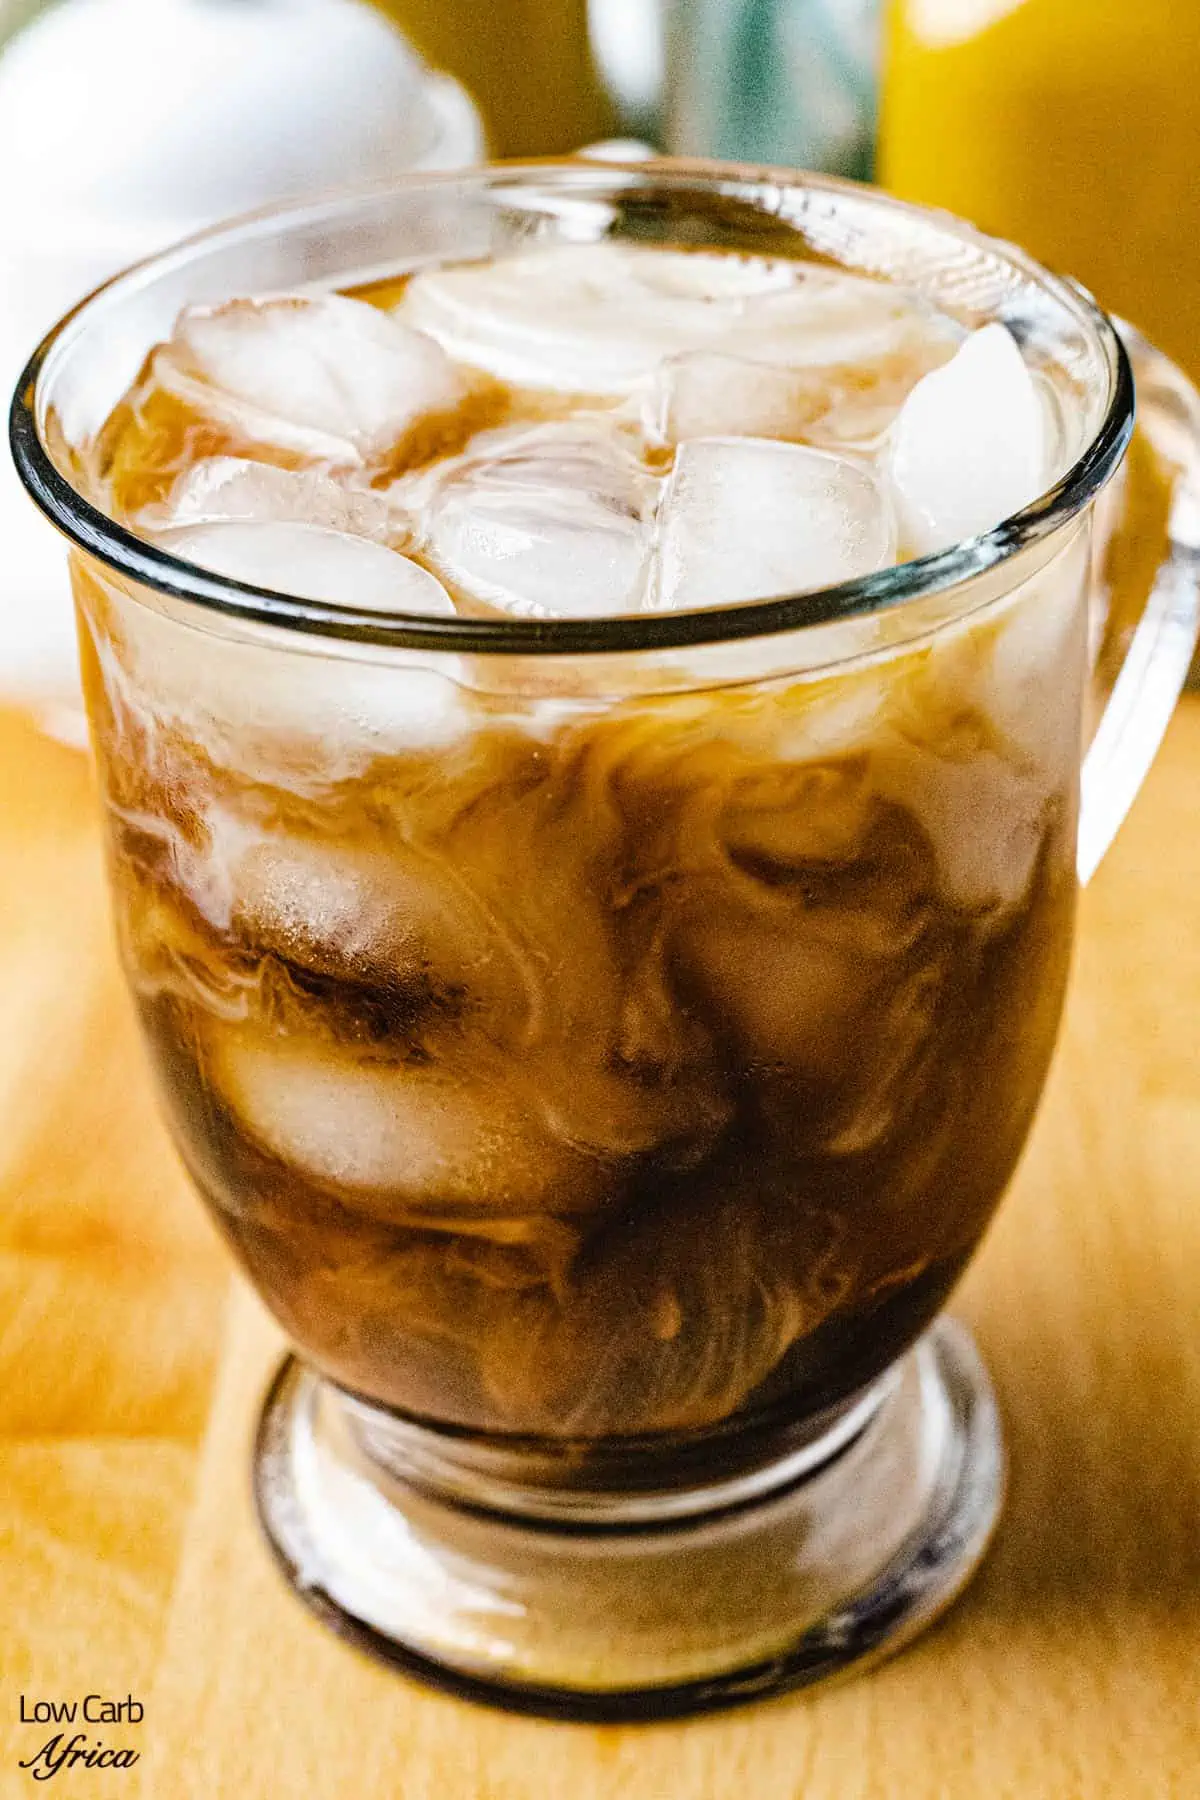 low carb iced coffee ready to drink.